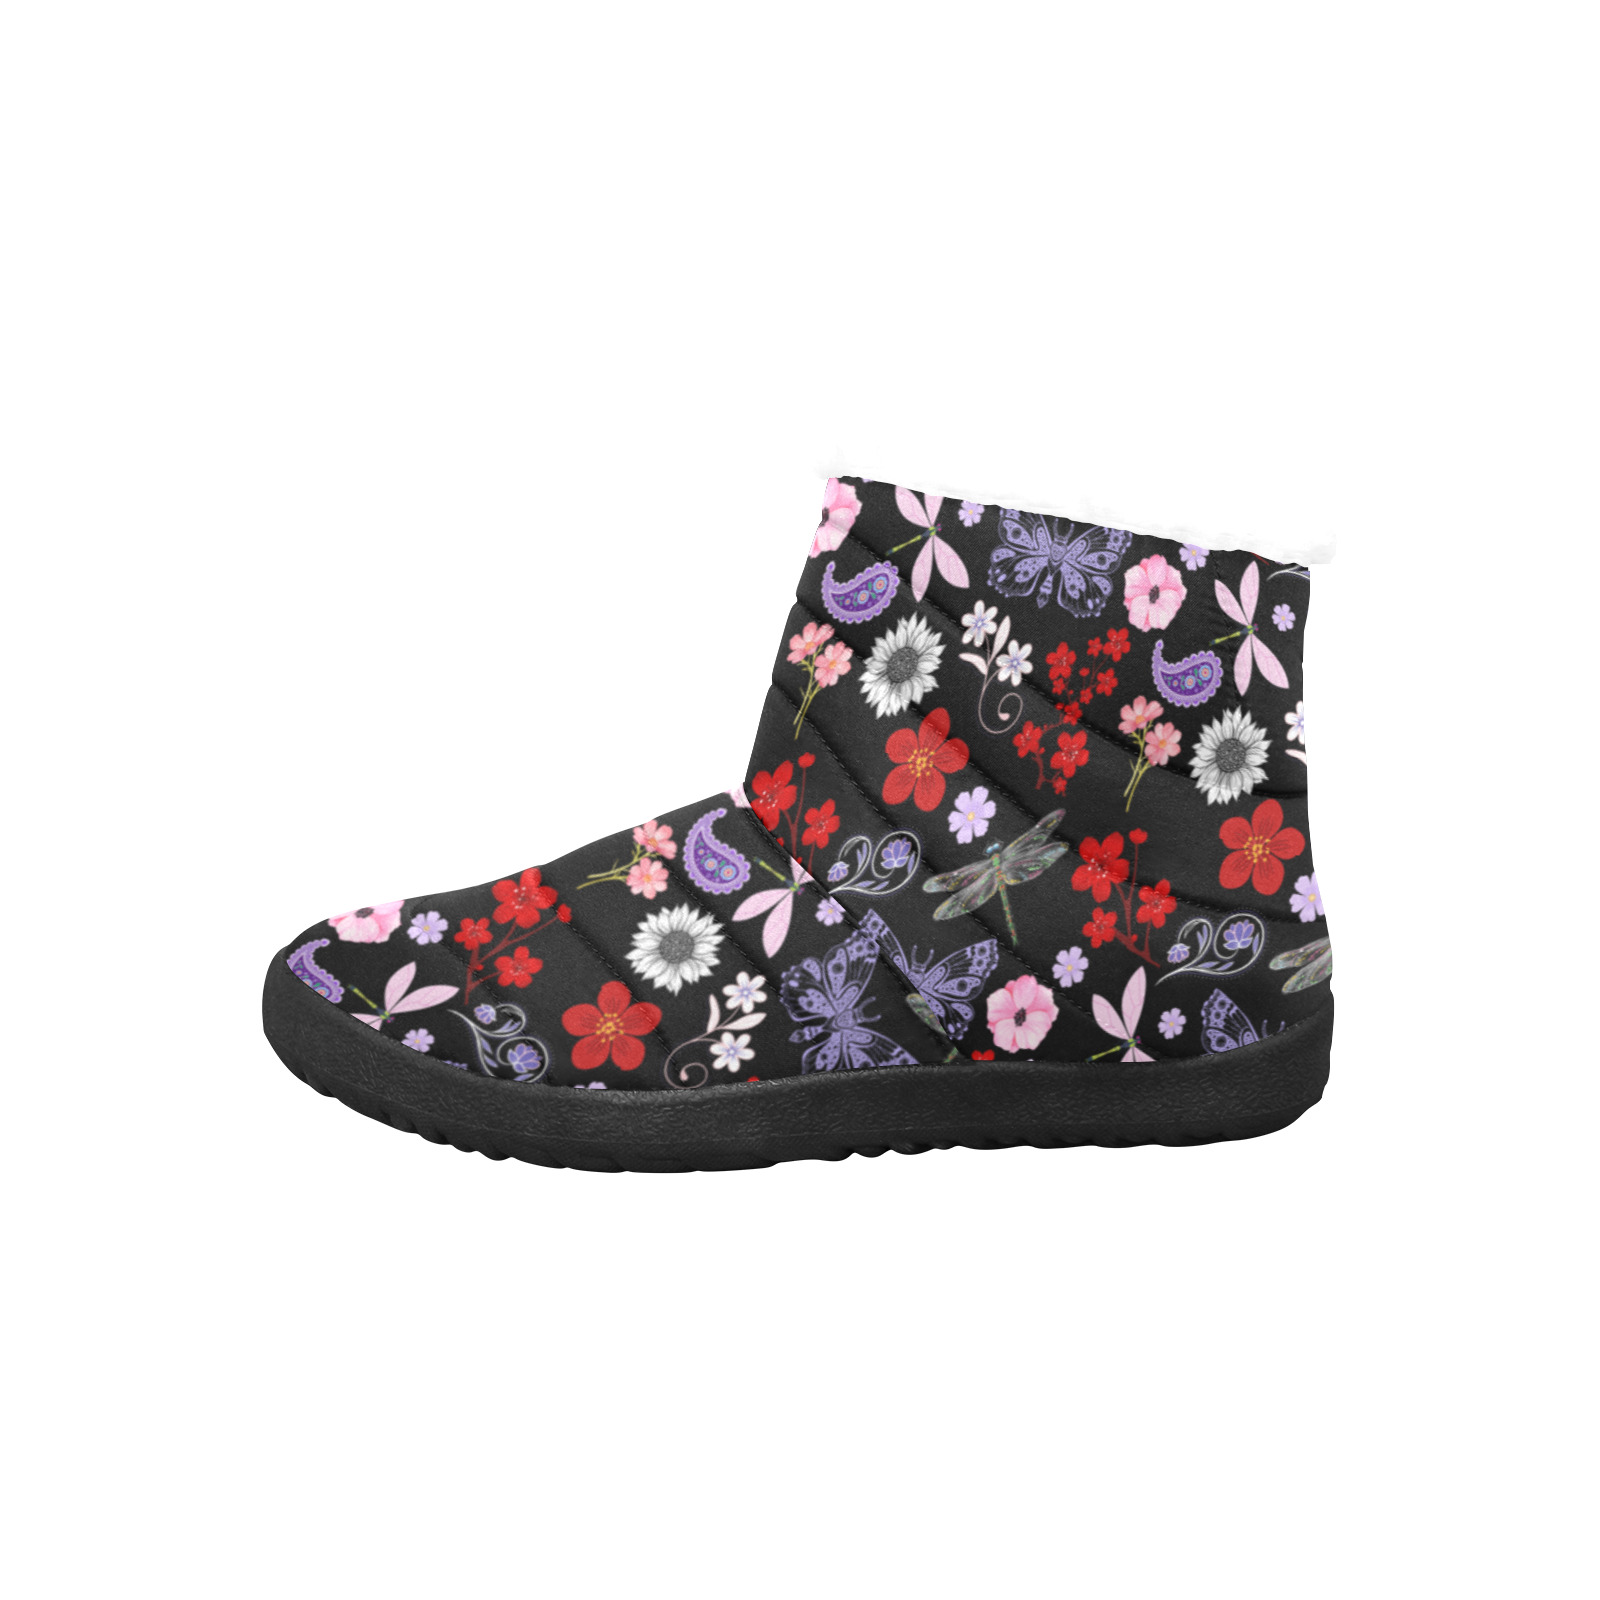 Black, Red, Pink, Purple, Dragonflies, Butterfly and Flowers Design Women's Cotton-Padded Shoes (Model 19291)